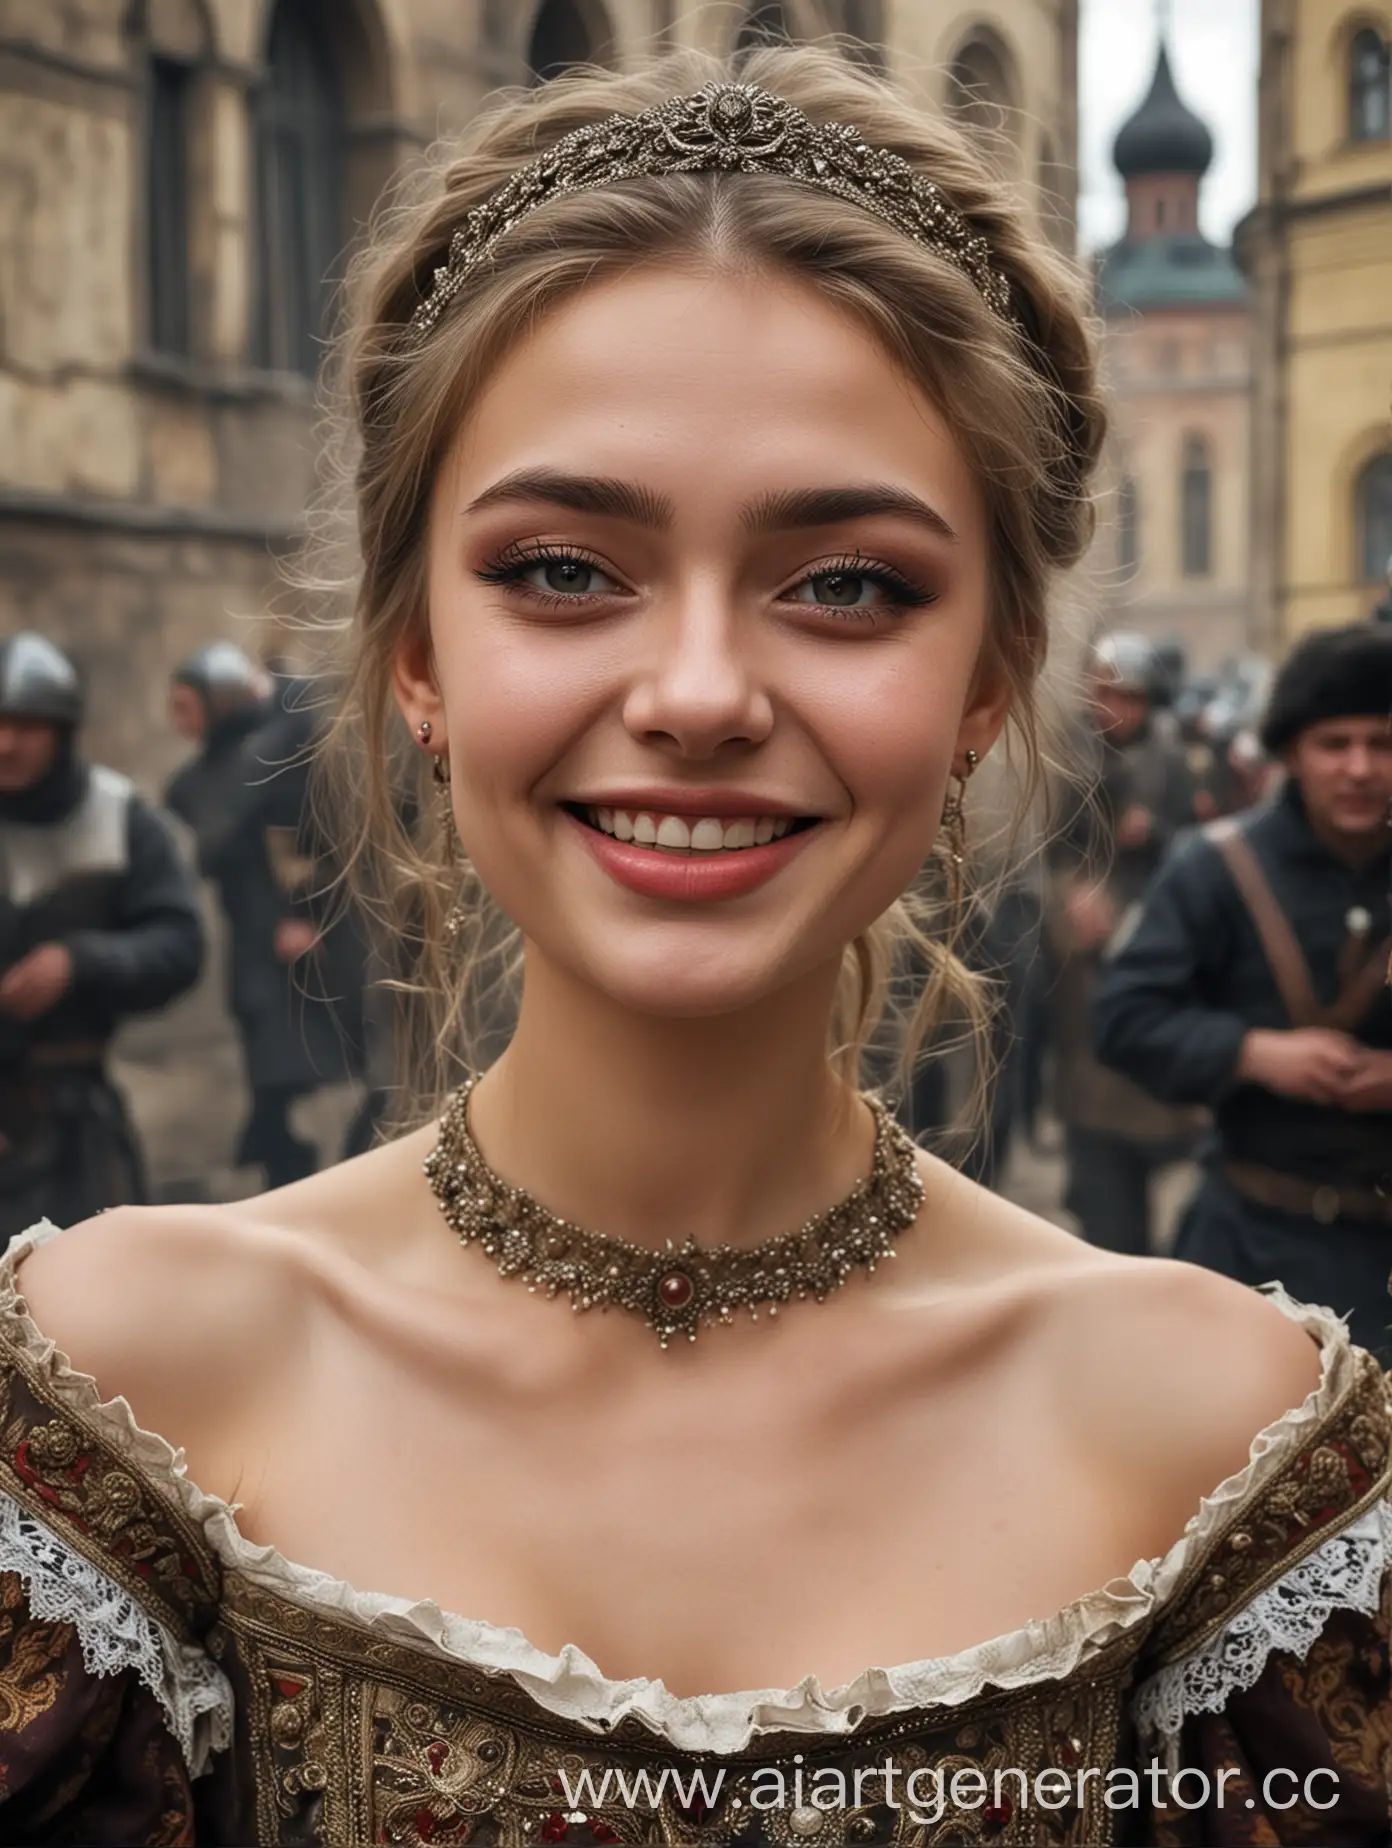 Beautiful-Russian-Girl-with-Makeup-Amid-Turbulent-16th-Century-Riots